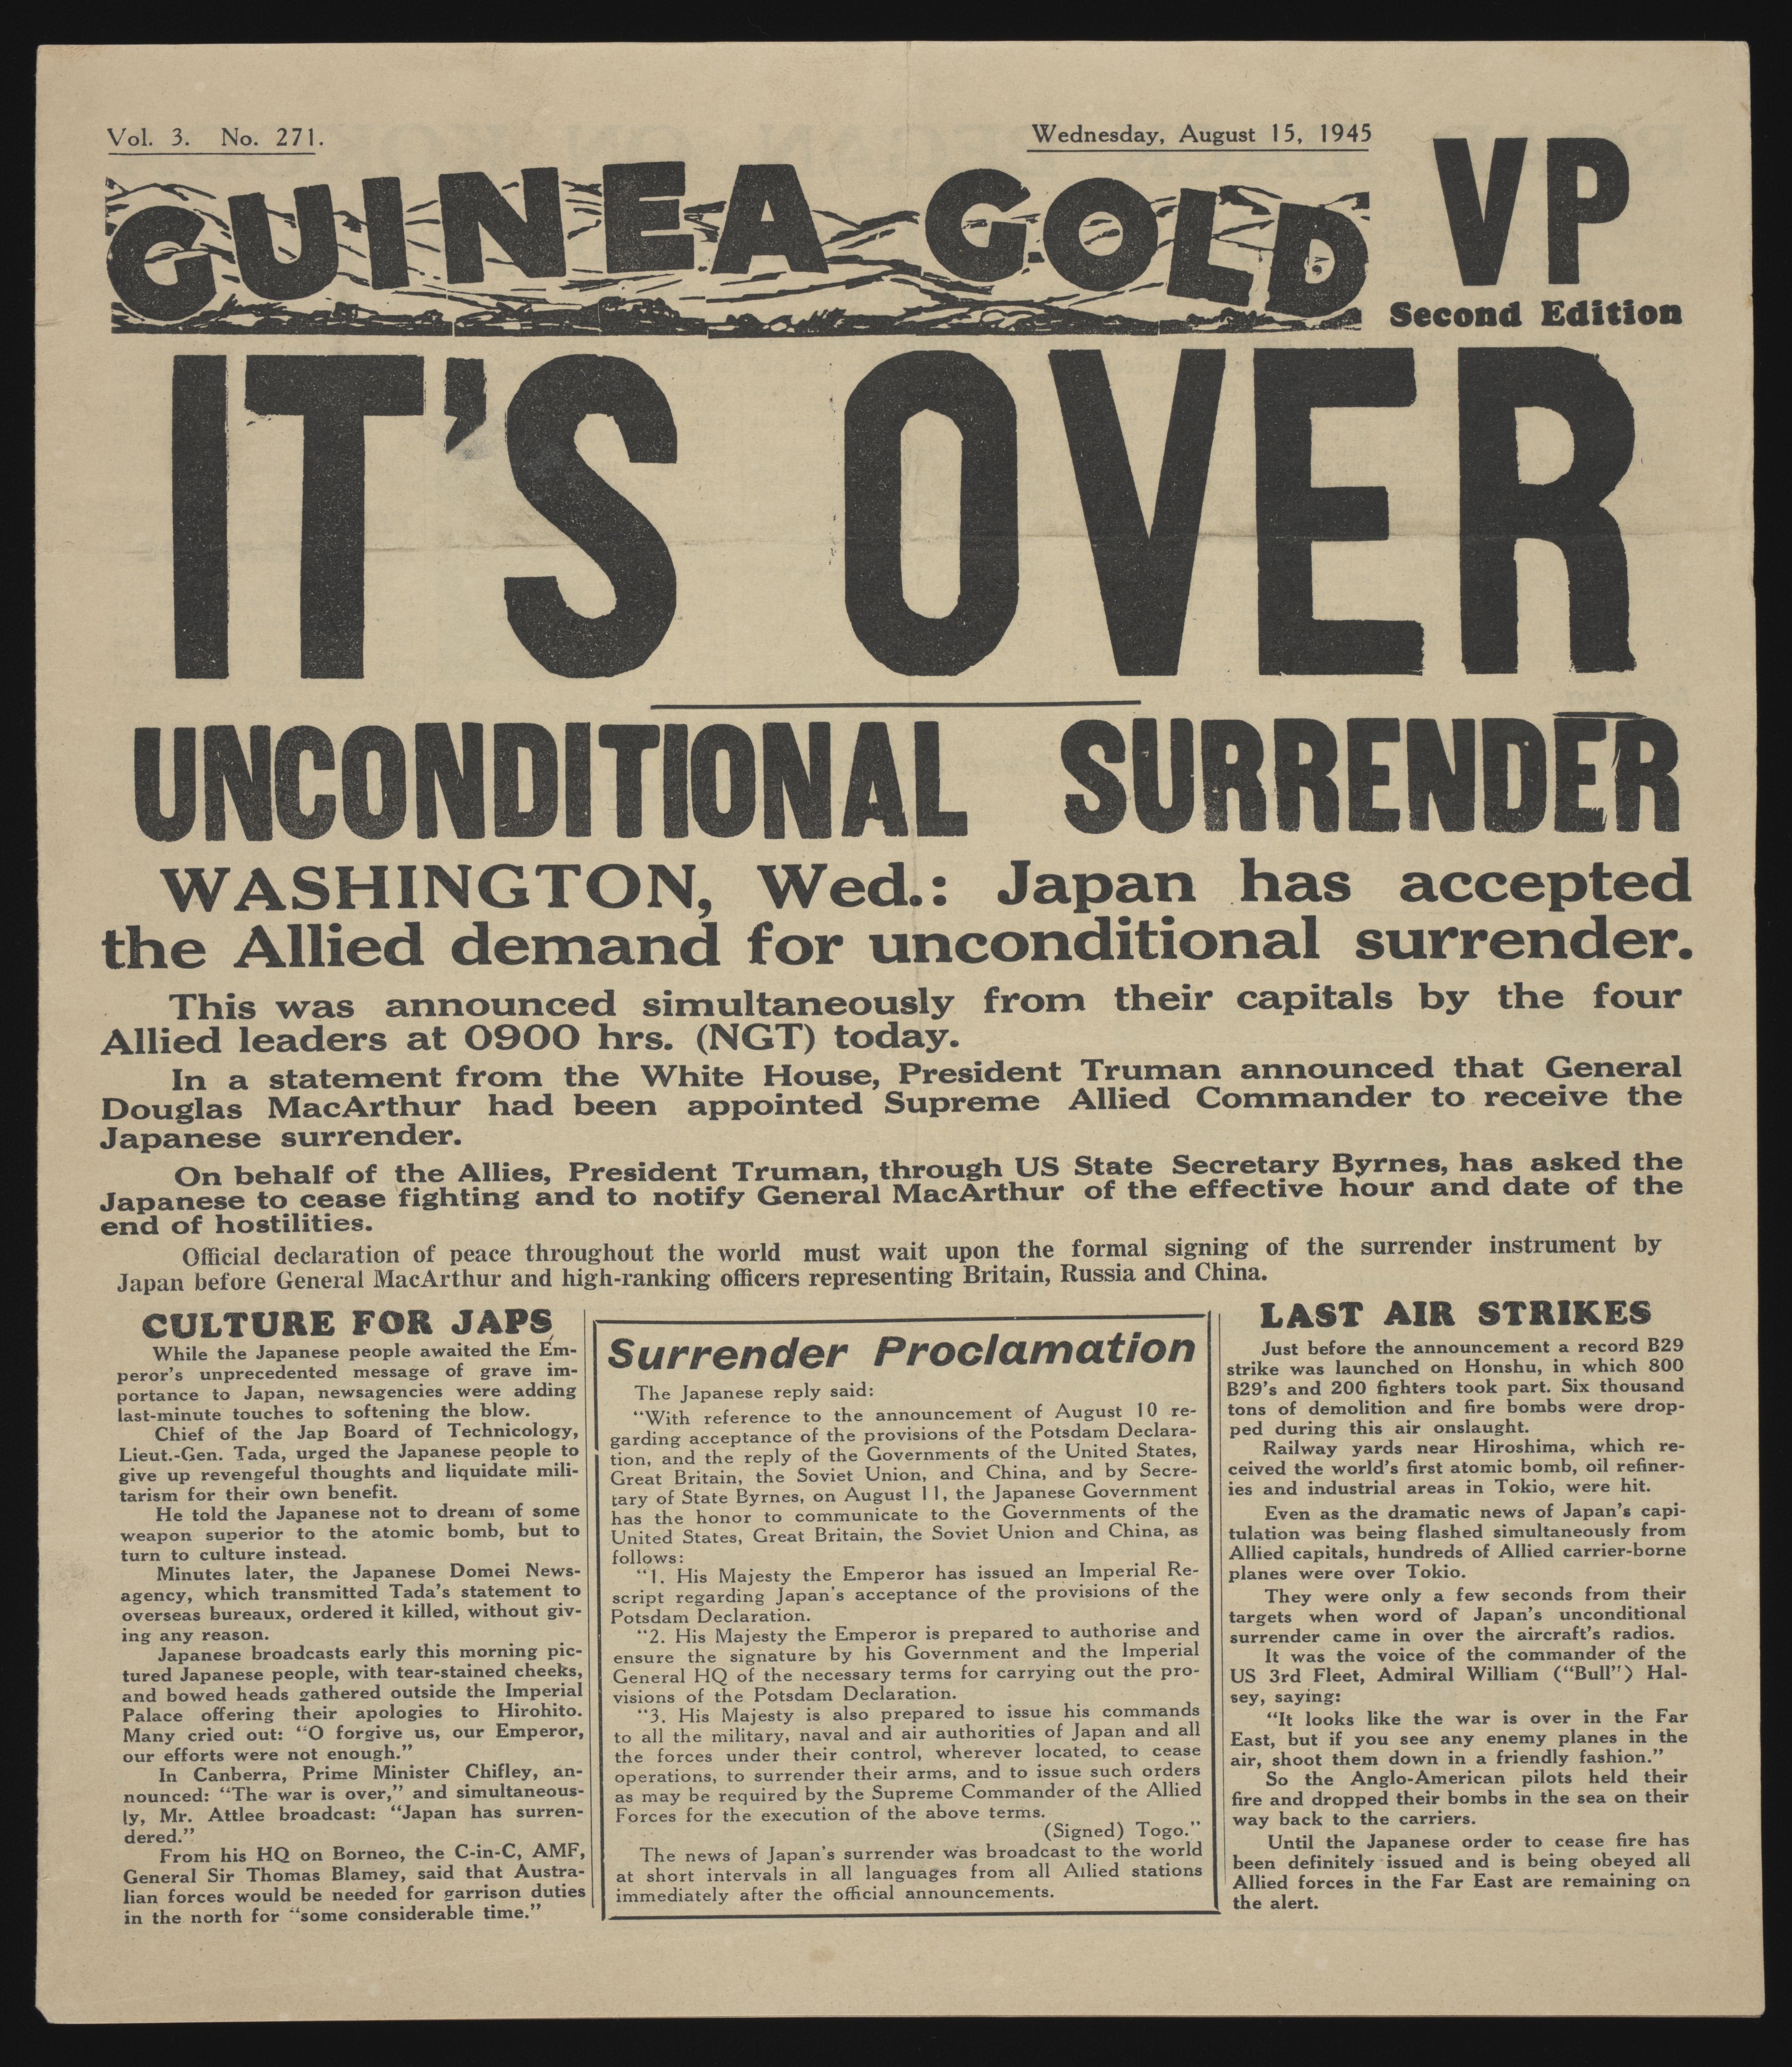 Guinea Gold - a 4-page printed newspaper was published daily from November 1942 to June 1946 Australian Soldiers with newspaper experience wrote world news stories by taking notes from shortwave radio bulletins.